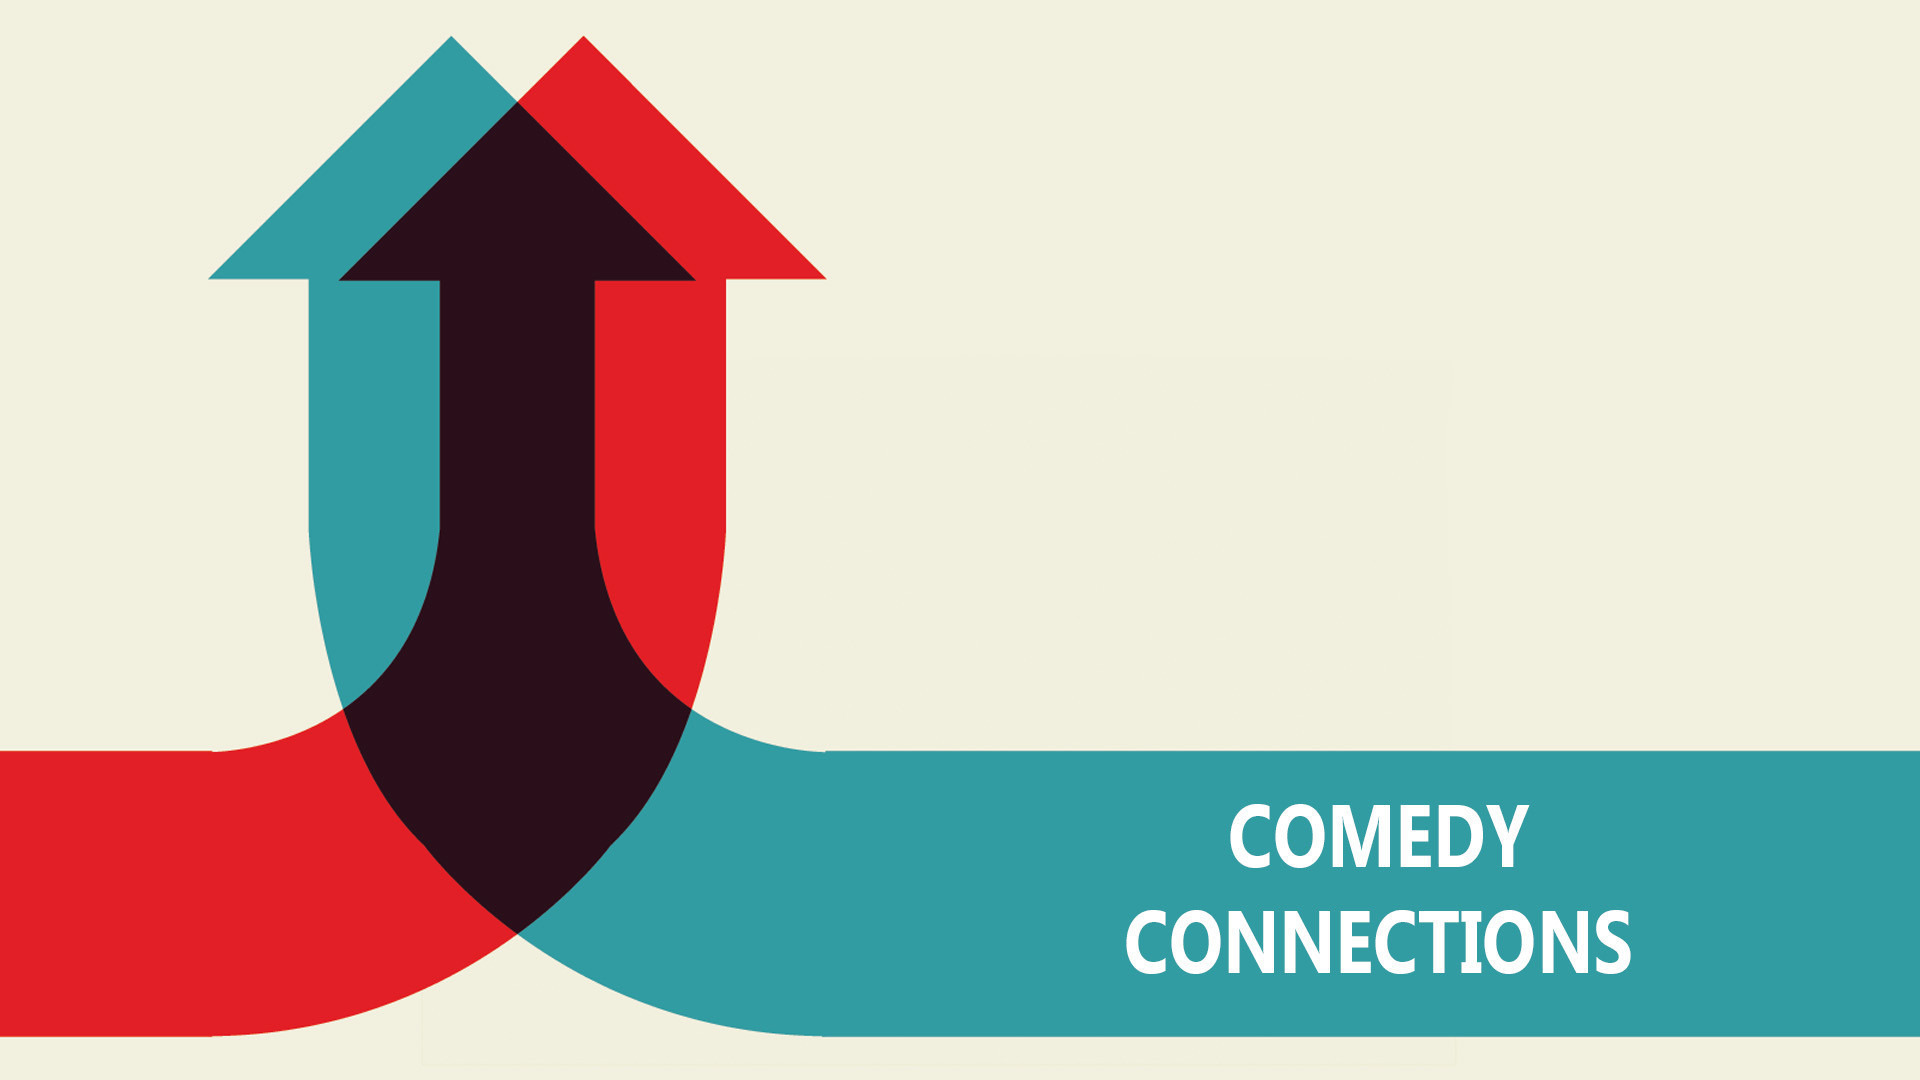 Show Comedy Connections